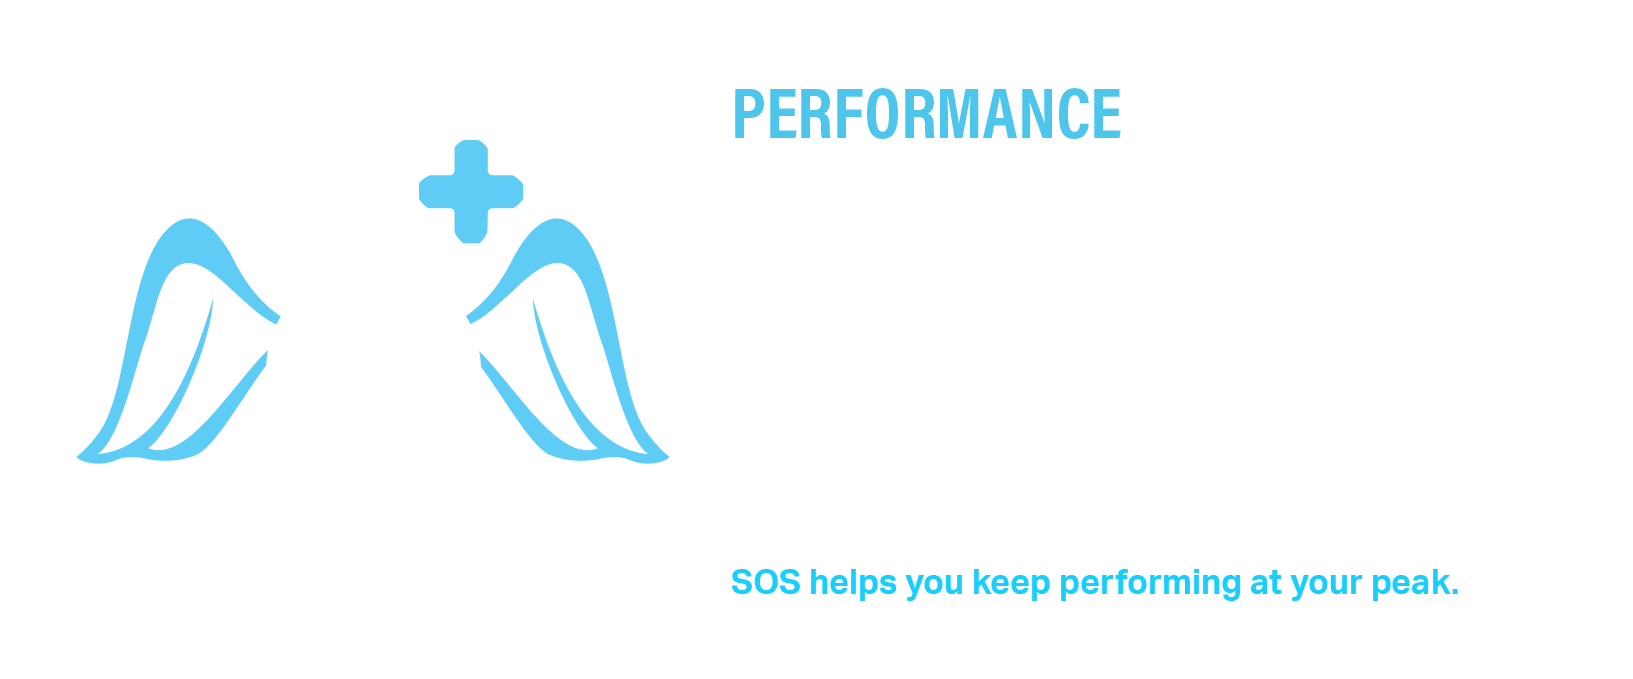 SOS Hydration Increases Athletes Performance